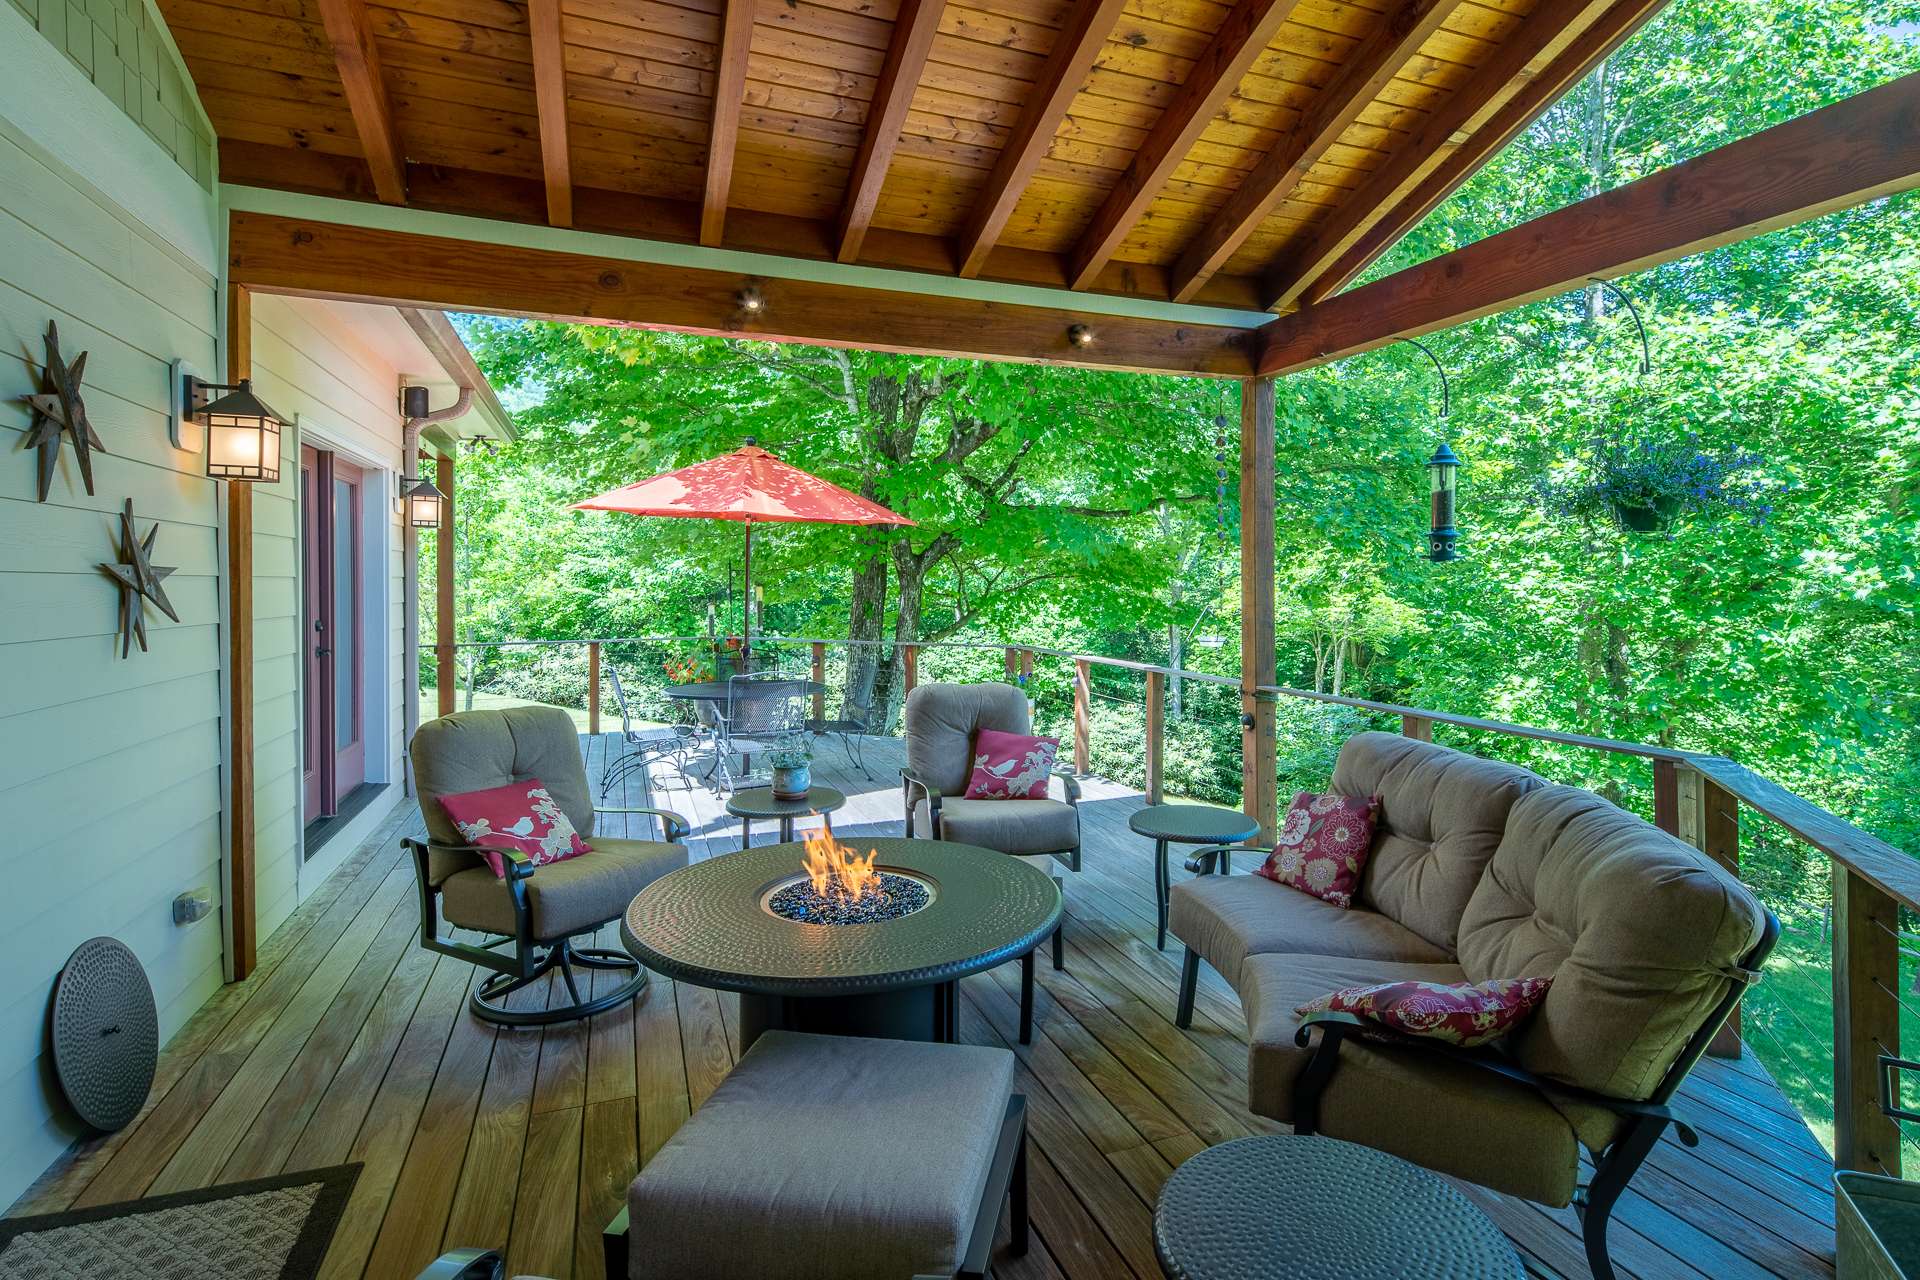 As you can see from the expanded side deck and screened porch, this home was designed for indoor & outdoor living.